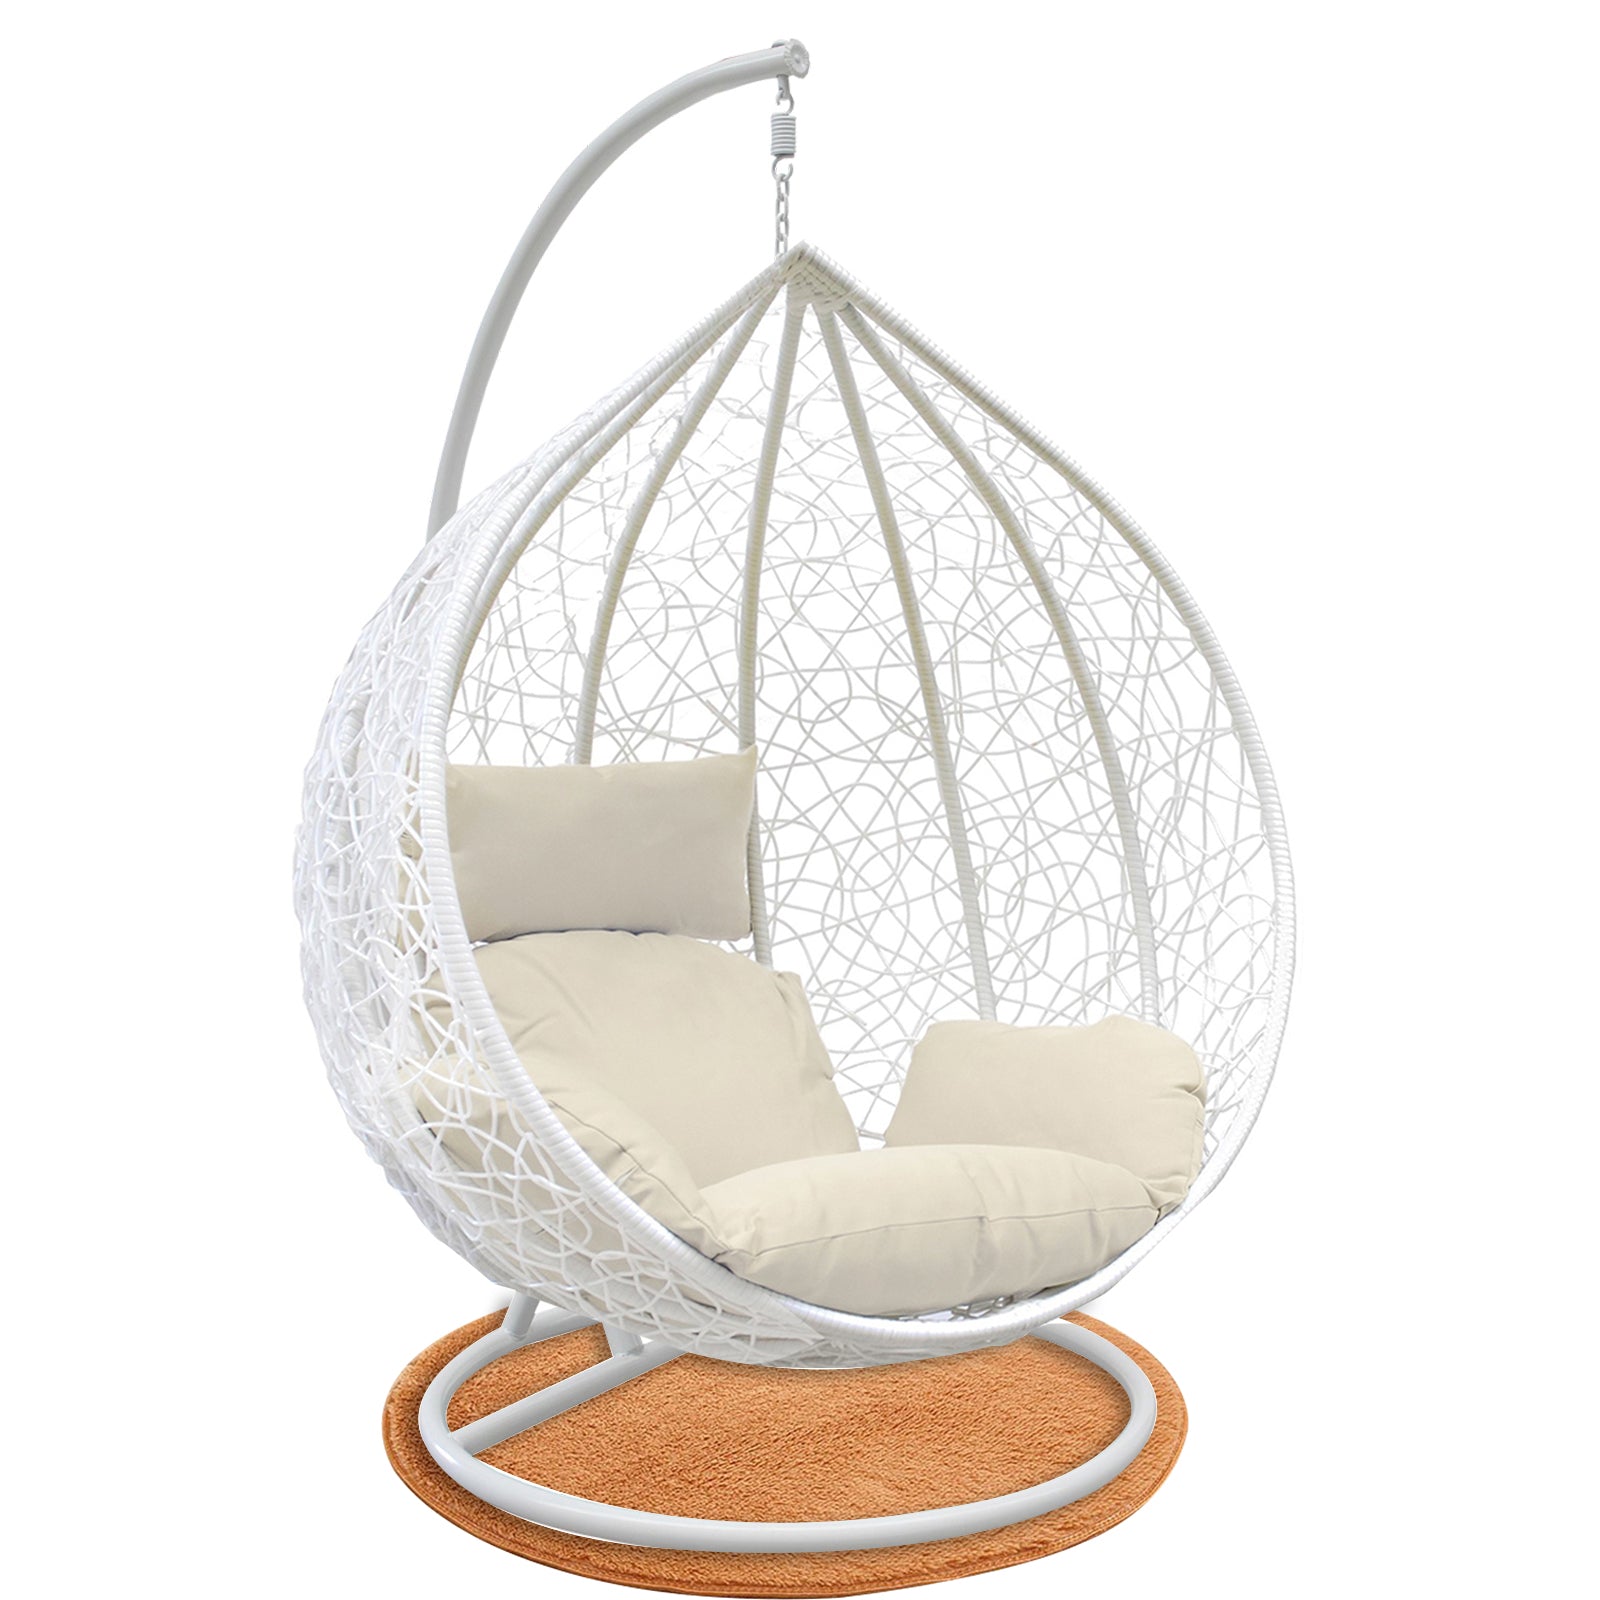 egg shaped swing chair, garden egg chair, the range hanging pod chair with stand, double egg swing chair, 2 person egg chair, egg basket chair, buy egg chair, garden pod chair, leather egg chair, range egg chair, egg chair stand only, folding egg chair